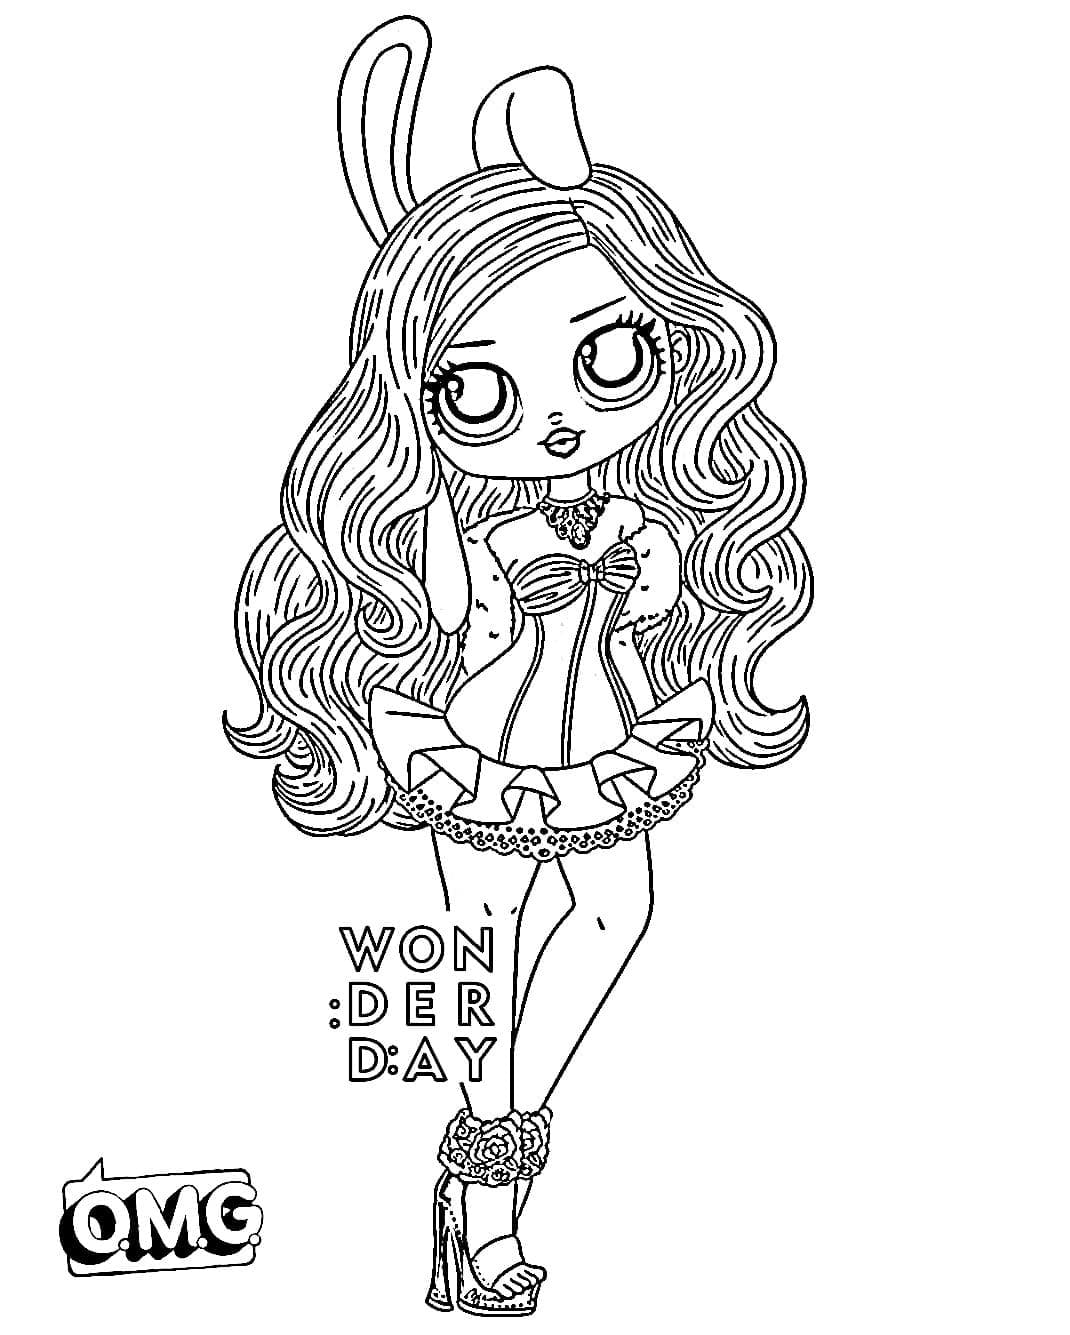 Bunny Doll LOL OMG coloring page